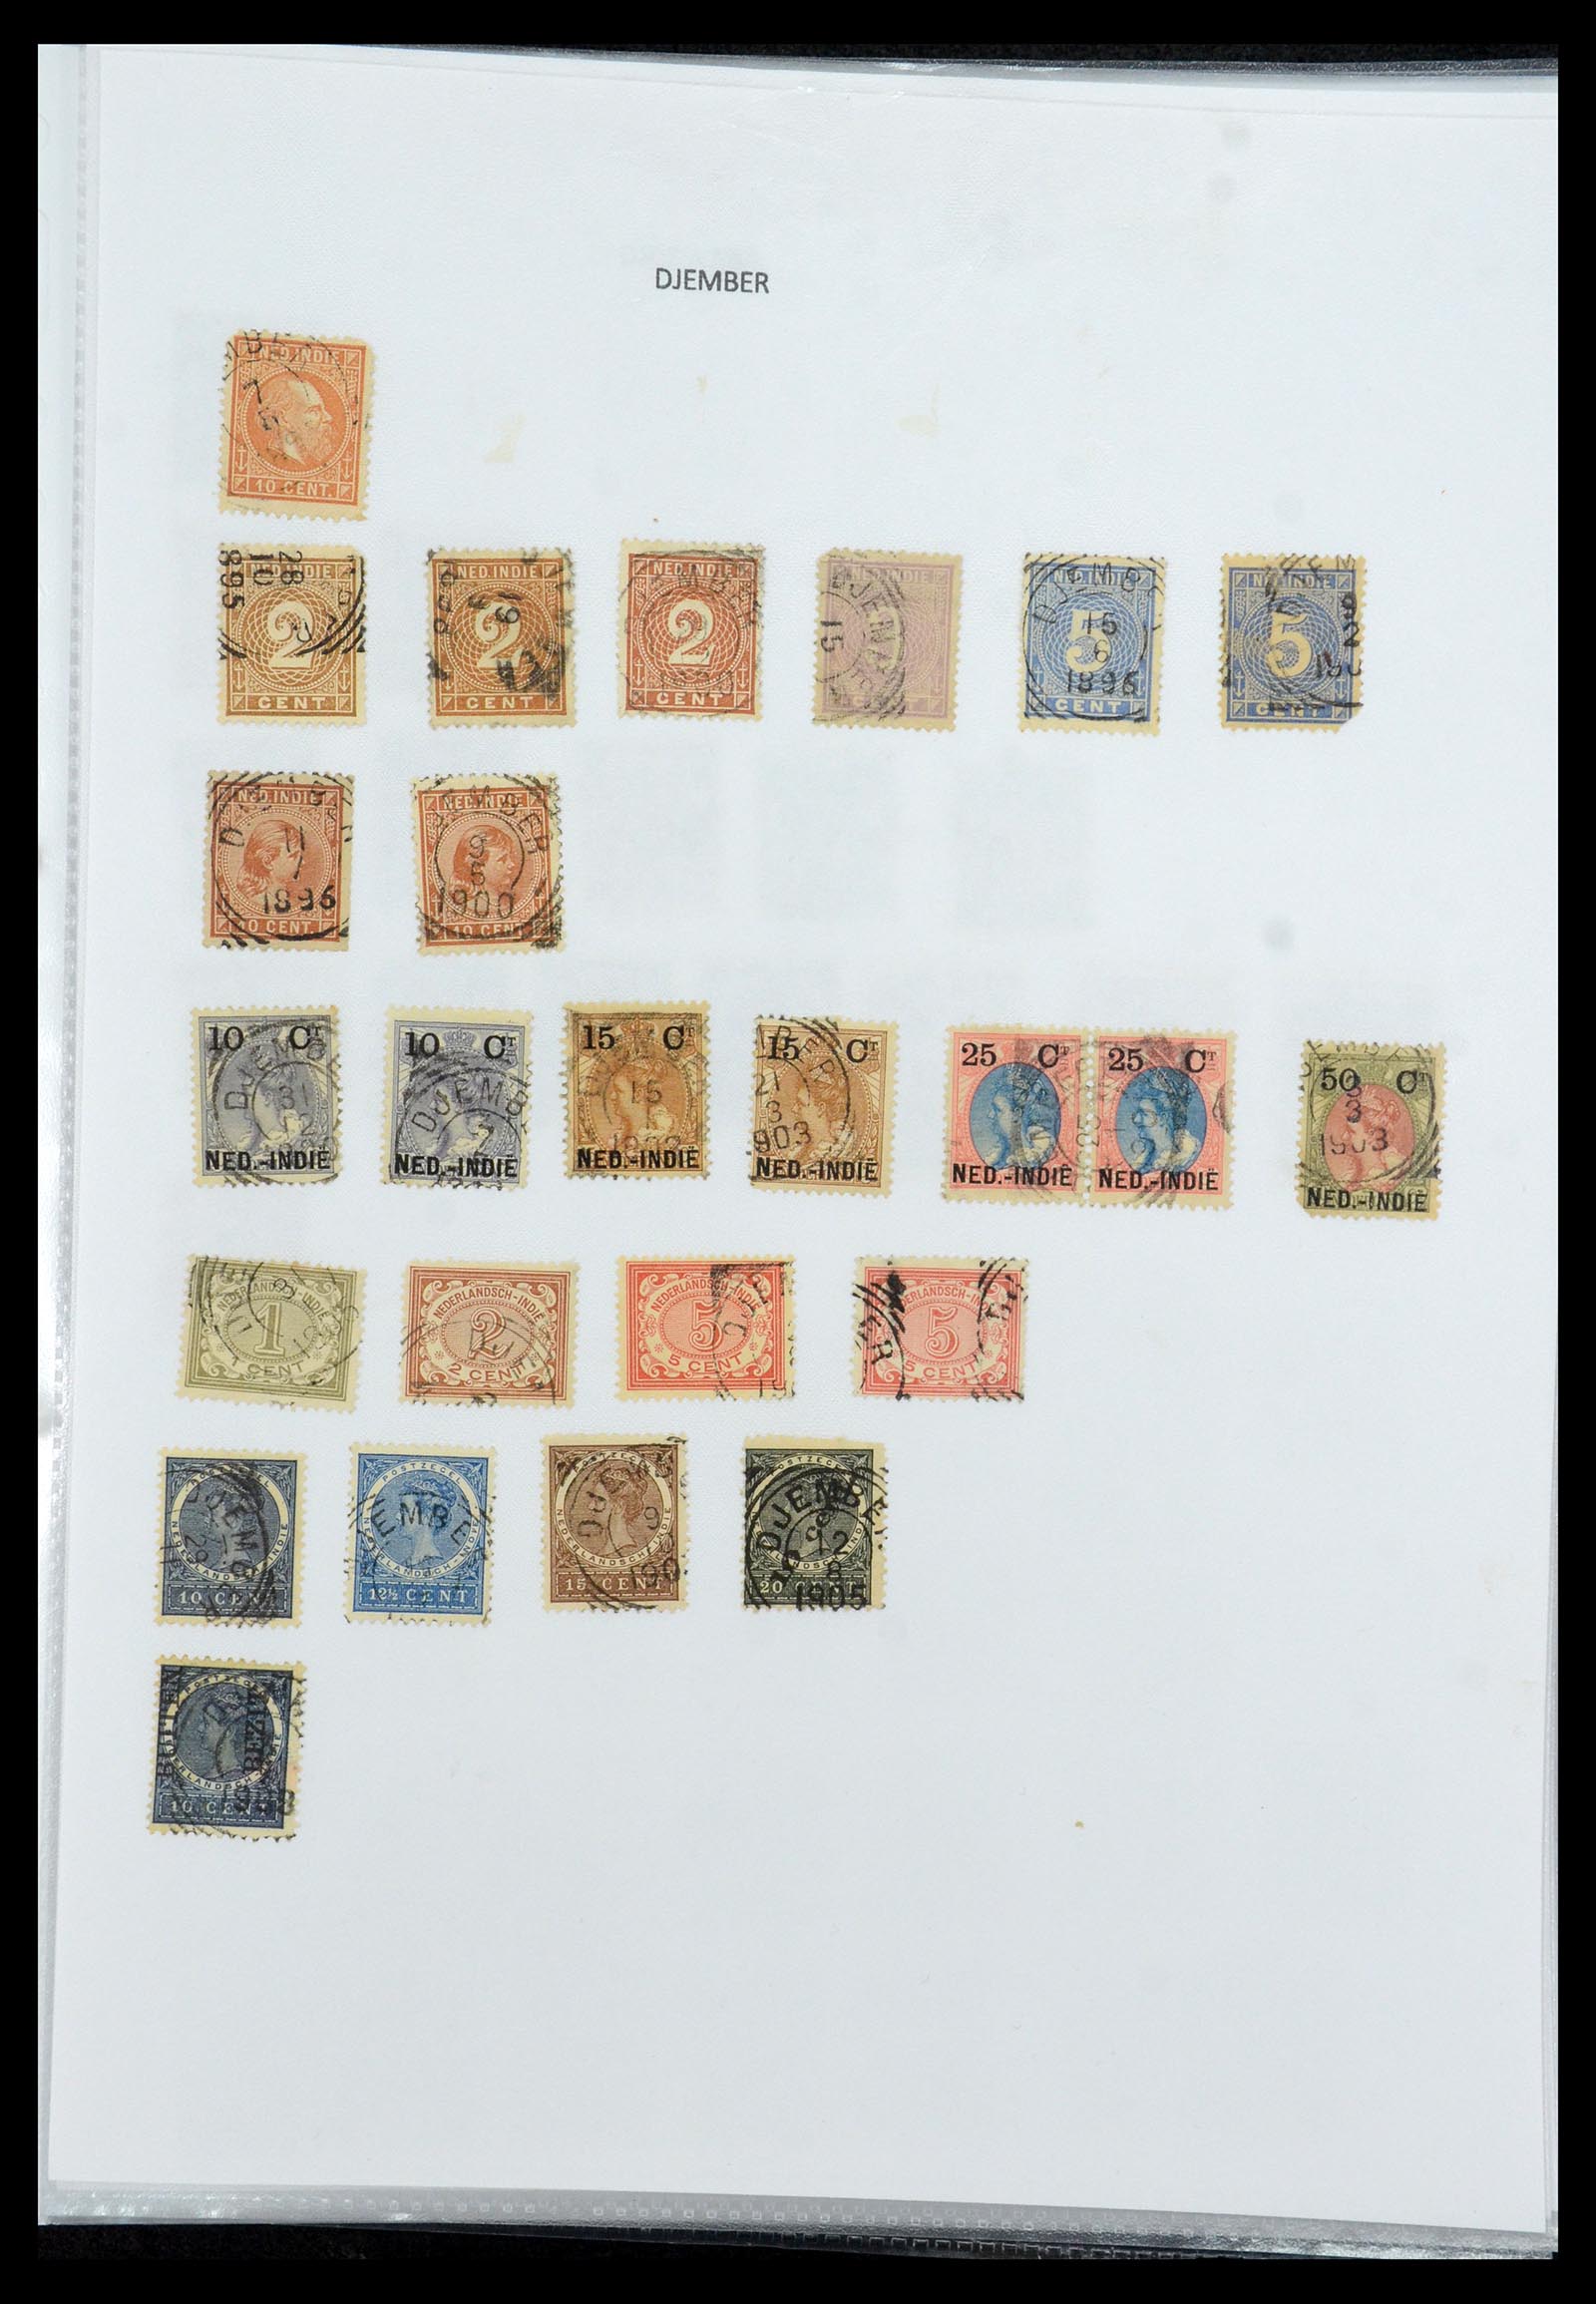 36432 045 - Stamp collection 36432 Dutch east Indies square cancels.